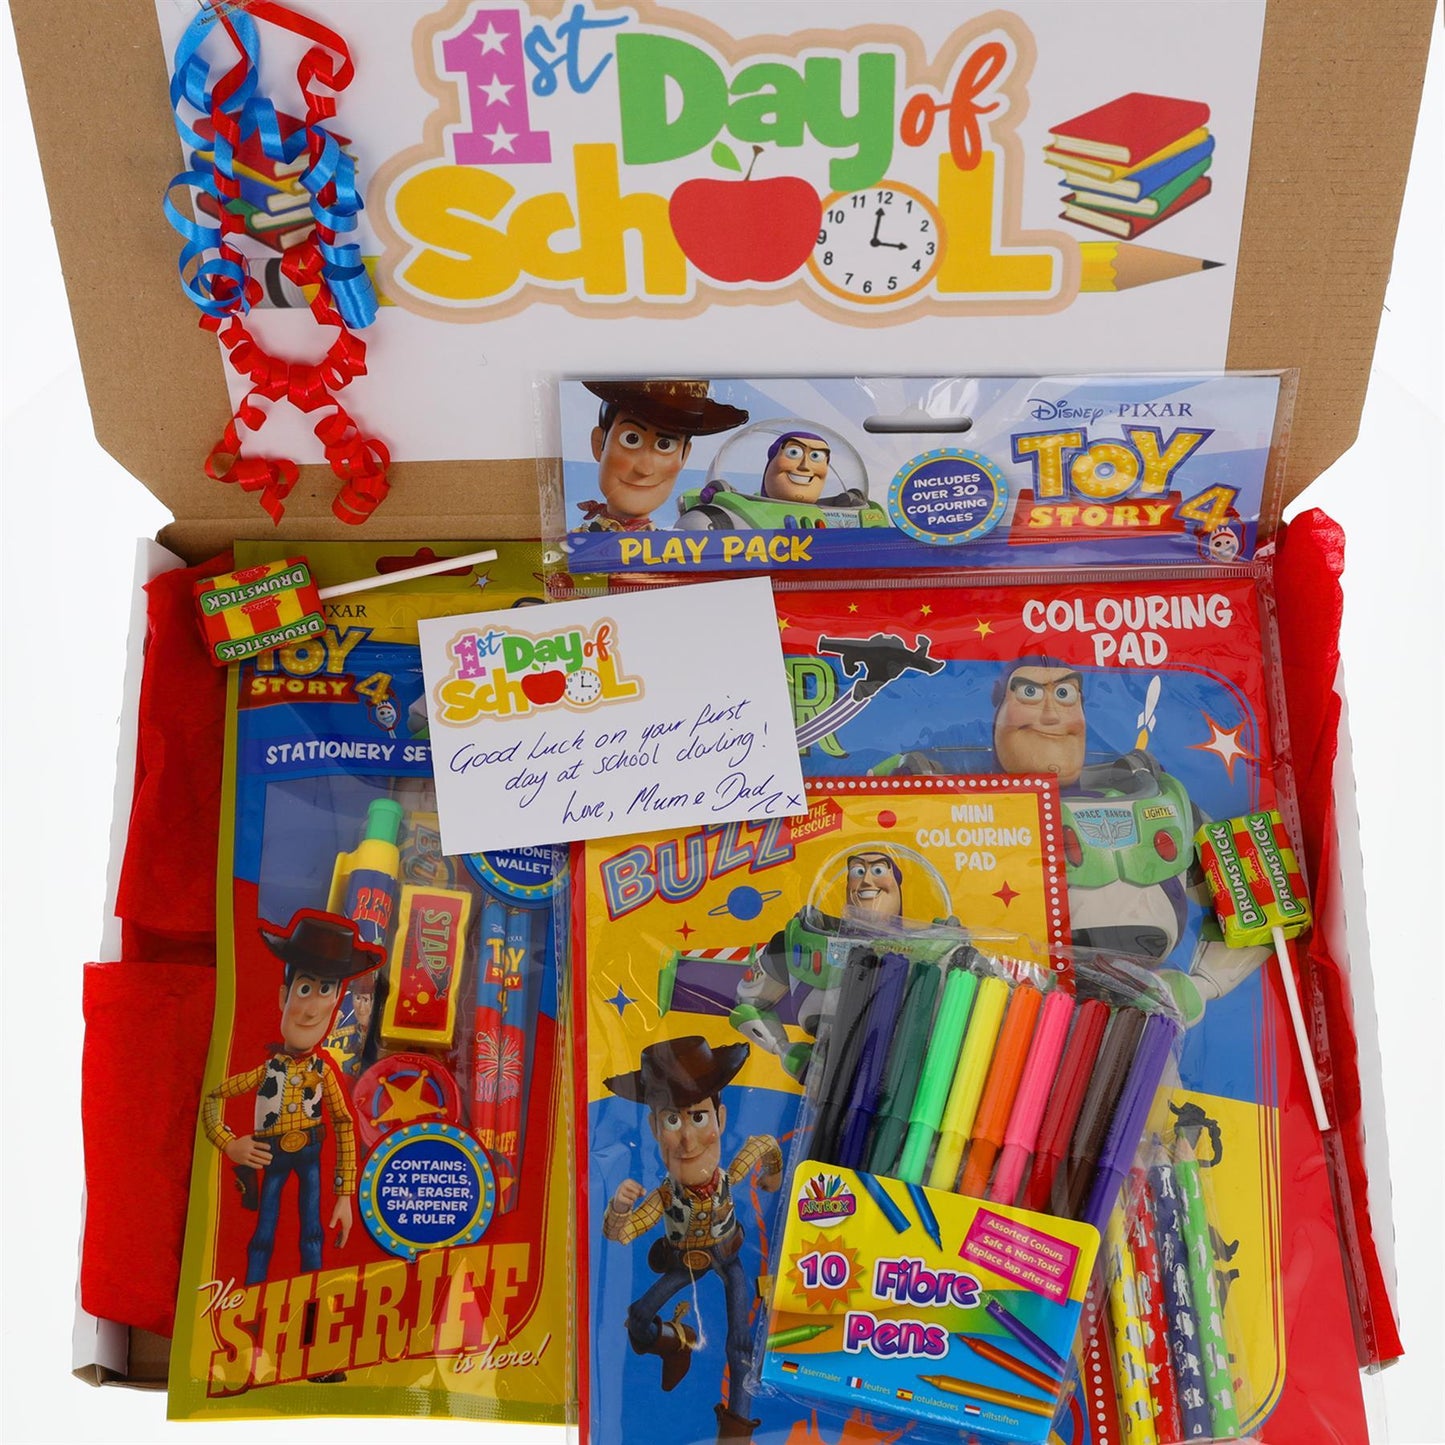 Toy Story Kids Fun Activity Pack Gift Box Birthday, New School Gift  - Always Looking Good -   